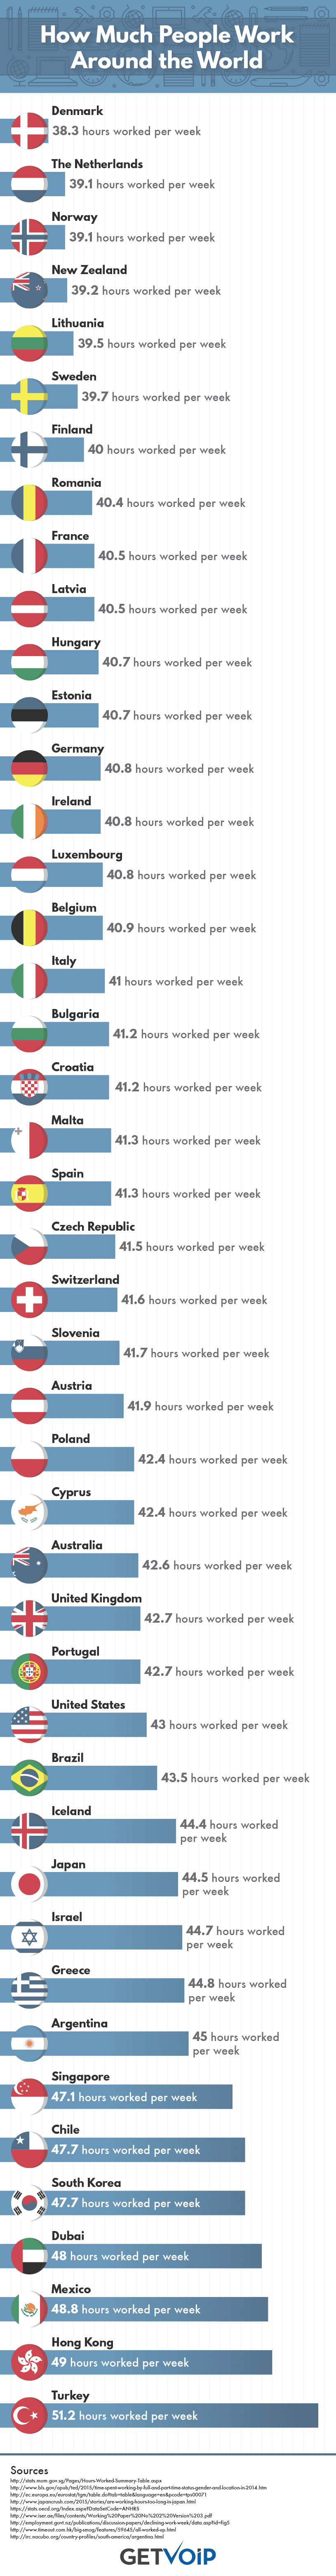 How Much People Work Infographic